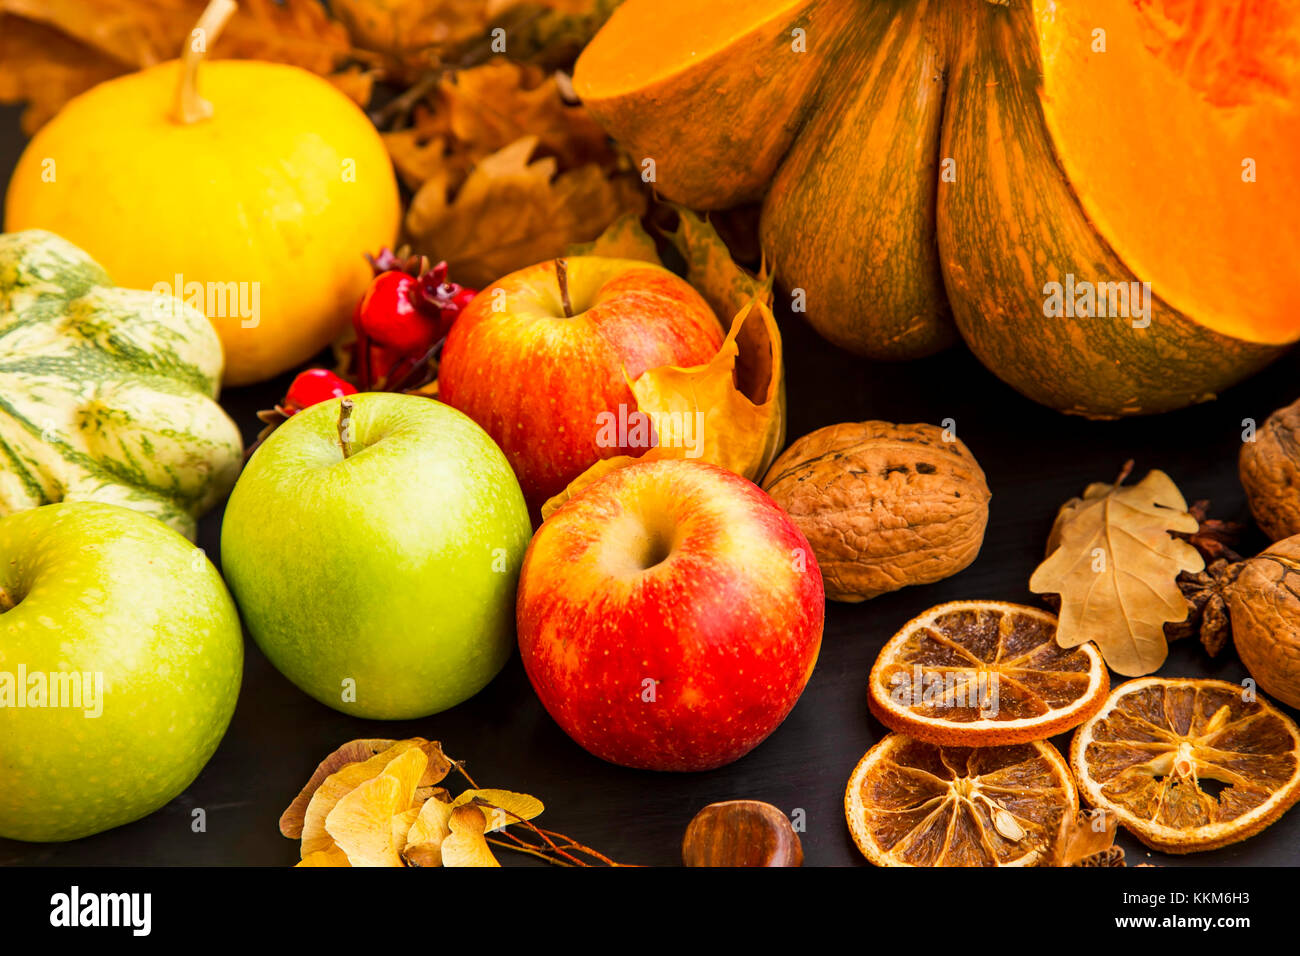 Autumn apples, fall fruits harvesting with pumpkins ,nuts and spices Stock Photo